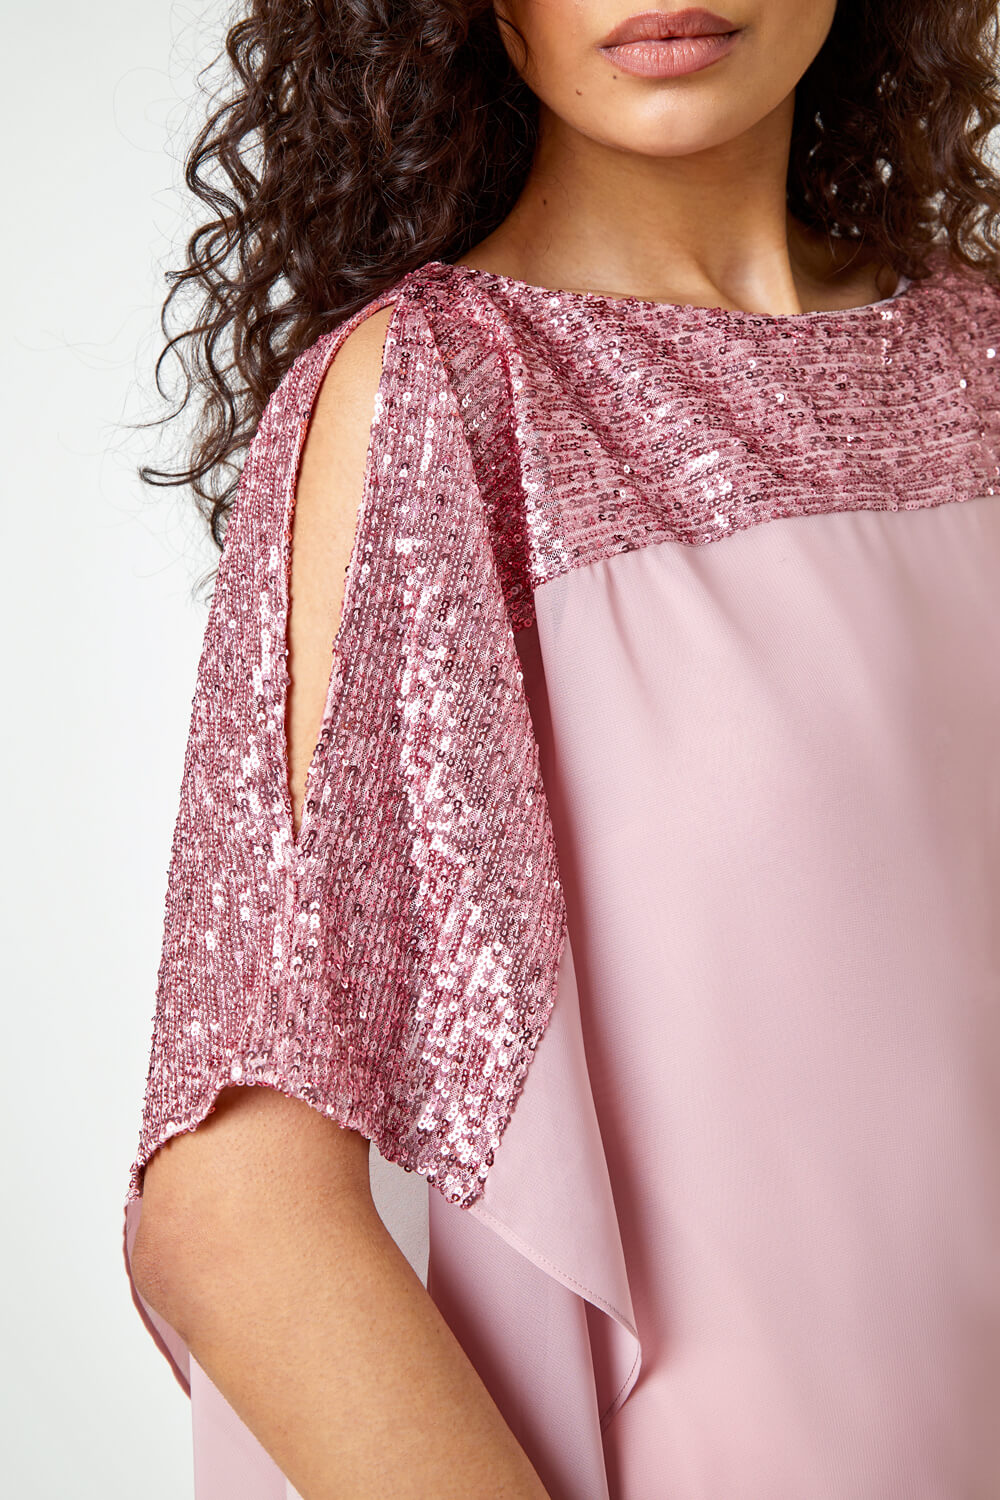 Rose Sequin Embellished Chiffon Overlay Top, Image 5 of 5